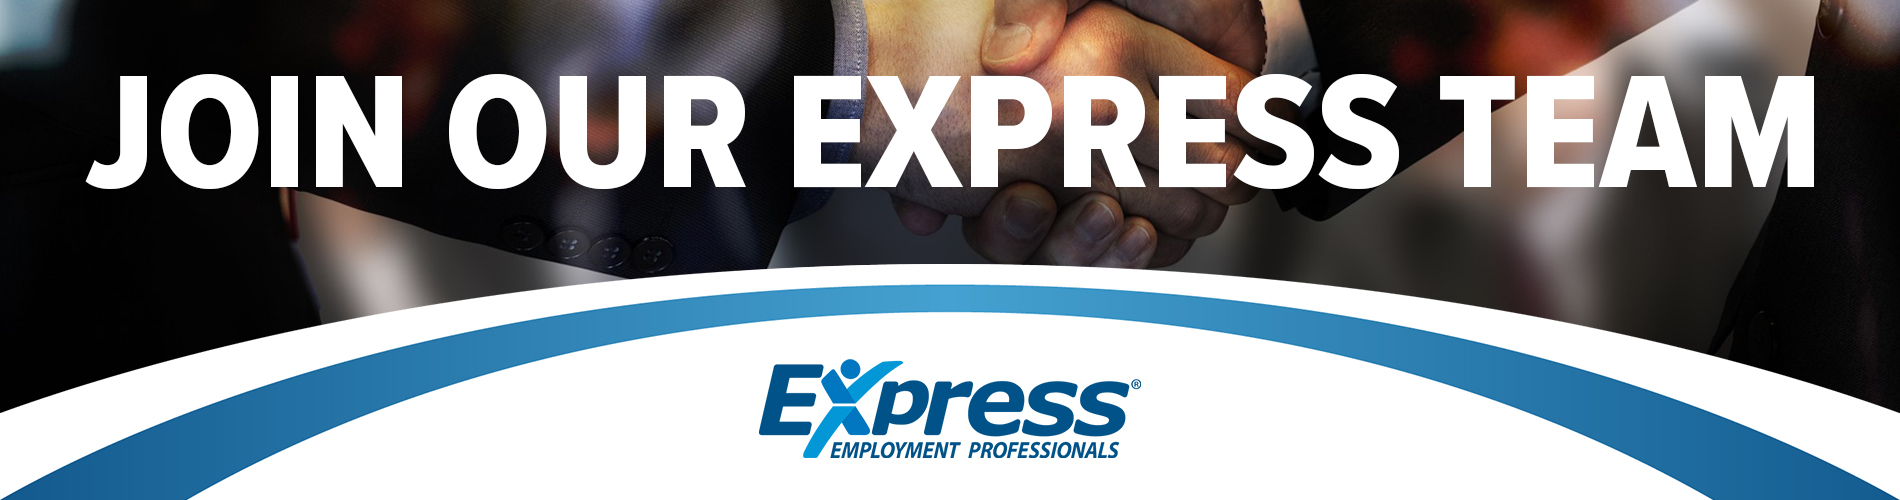 Join Our Express Team, Staffing and Recruiting Jobs in Ottawa